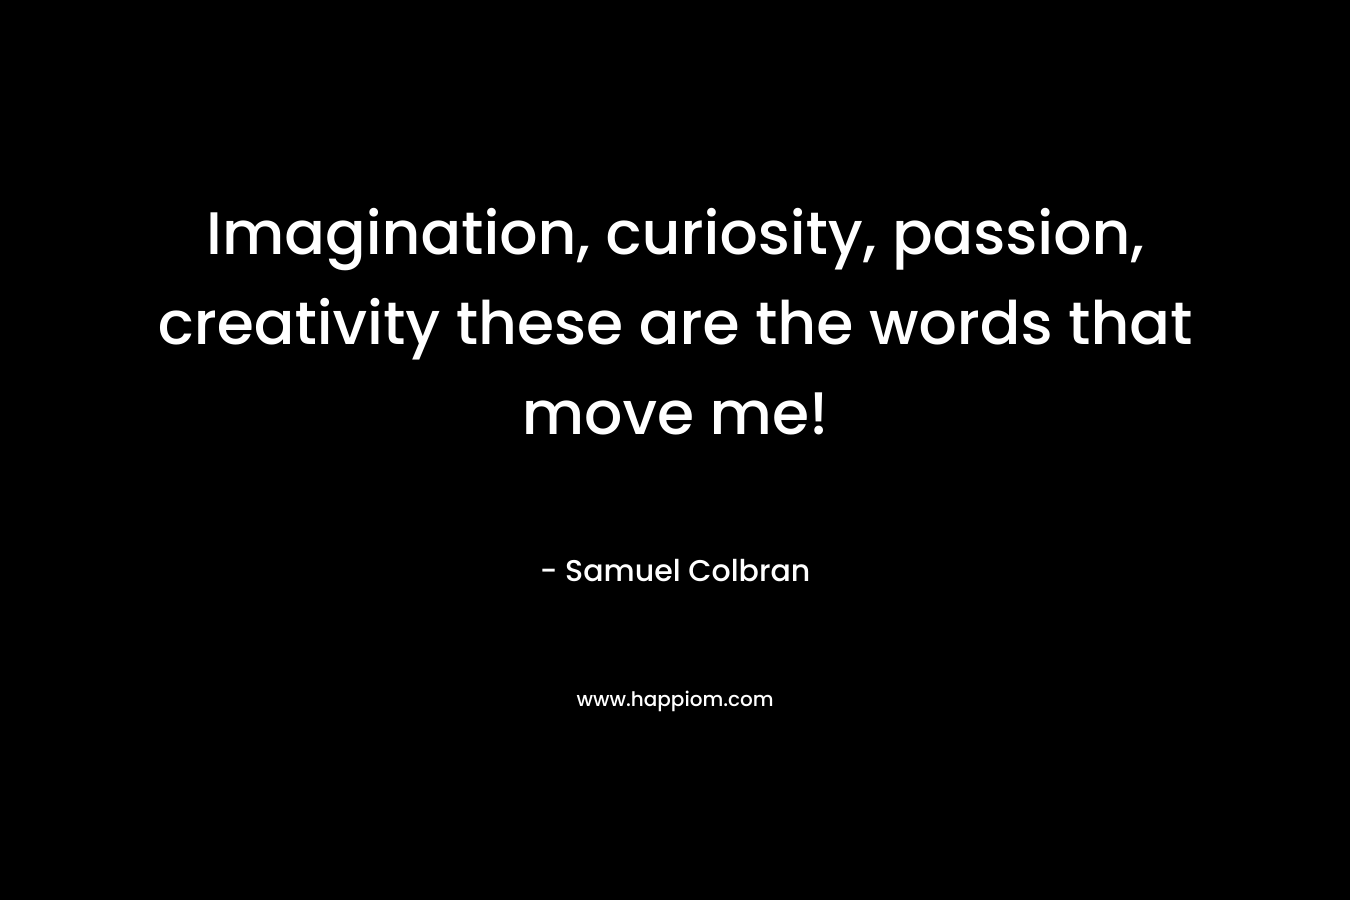 Imagination, curiosity, passion, creativity these are the words that move me! – Samuel Colbran